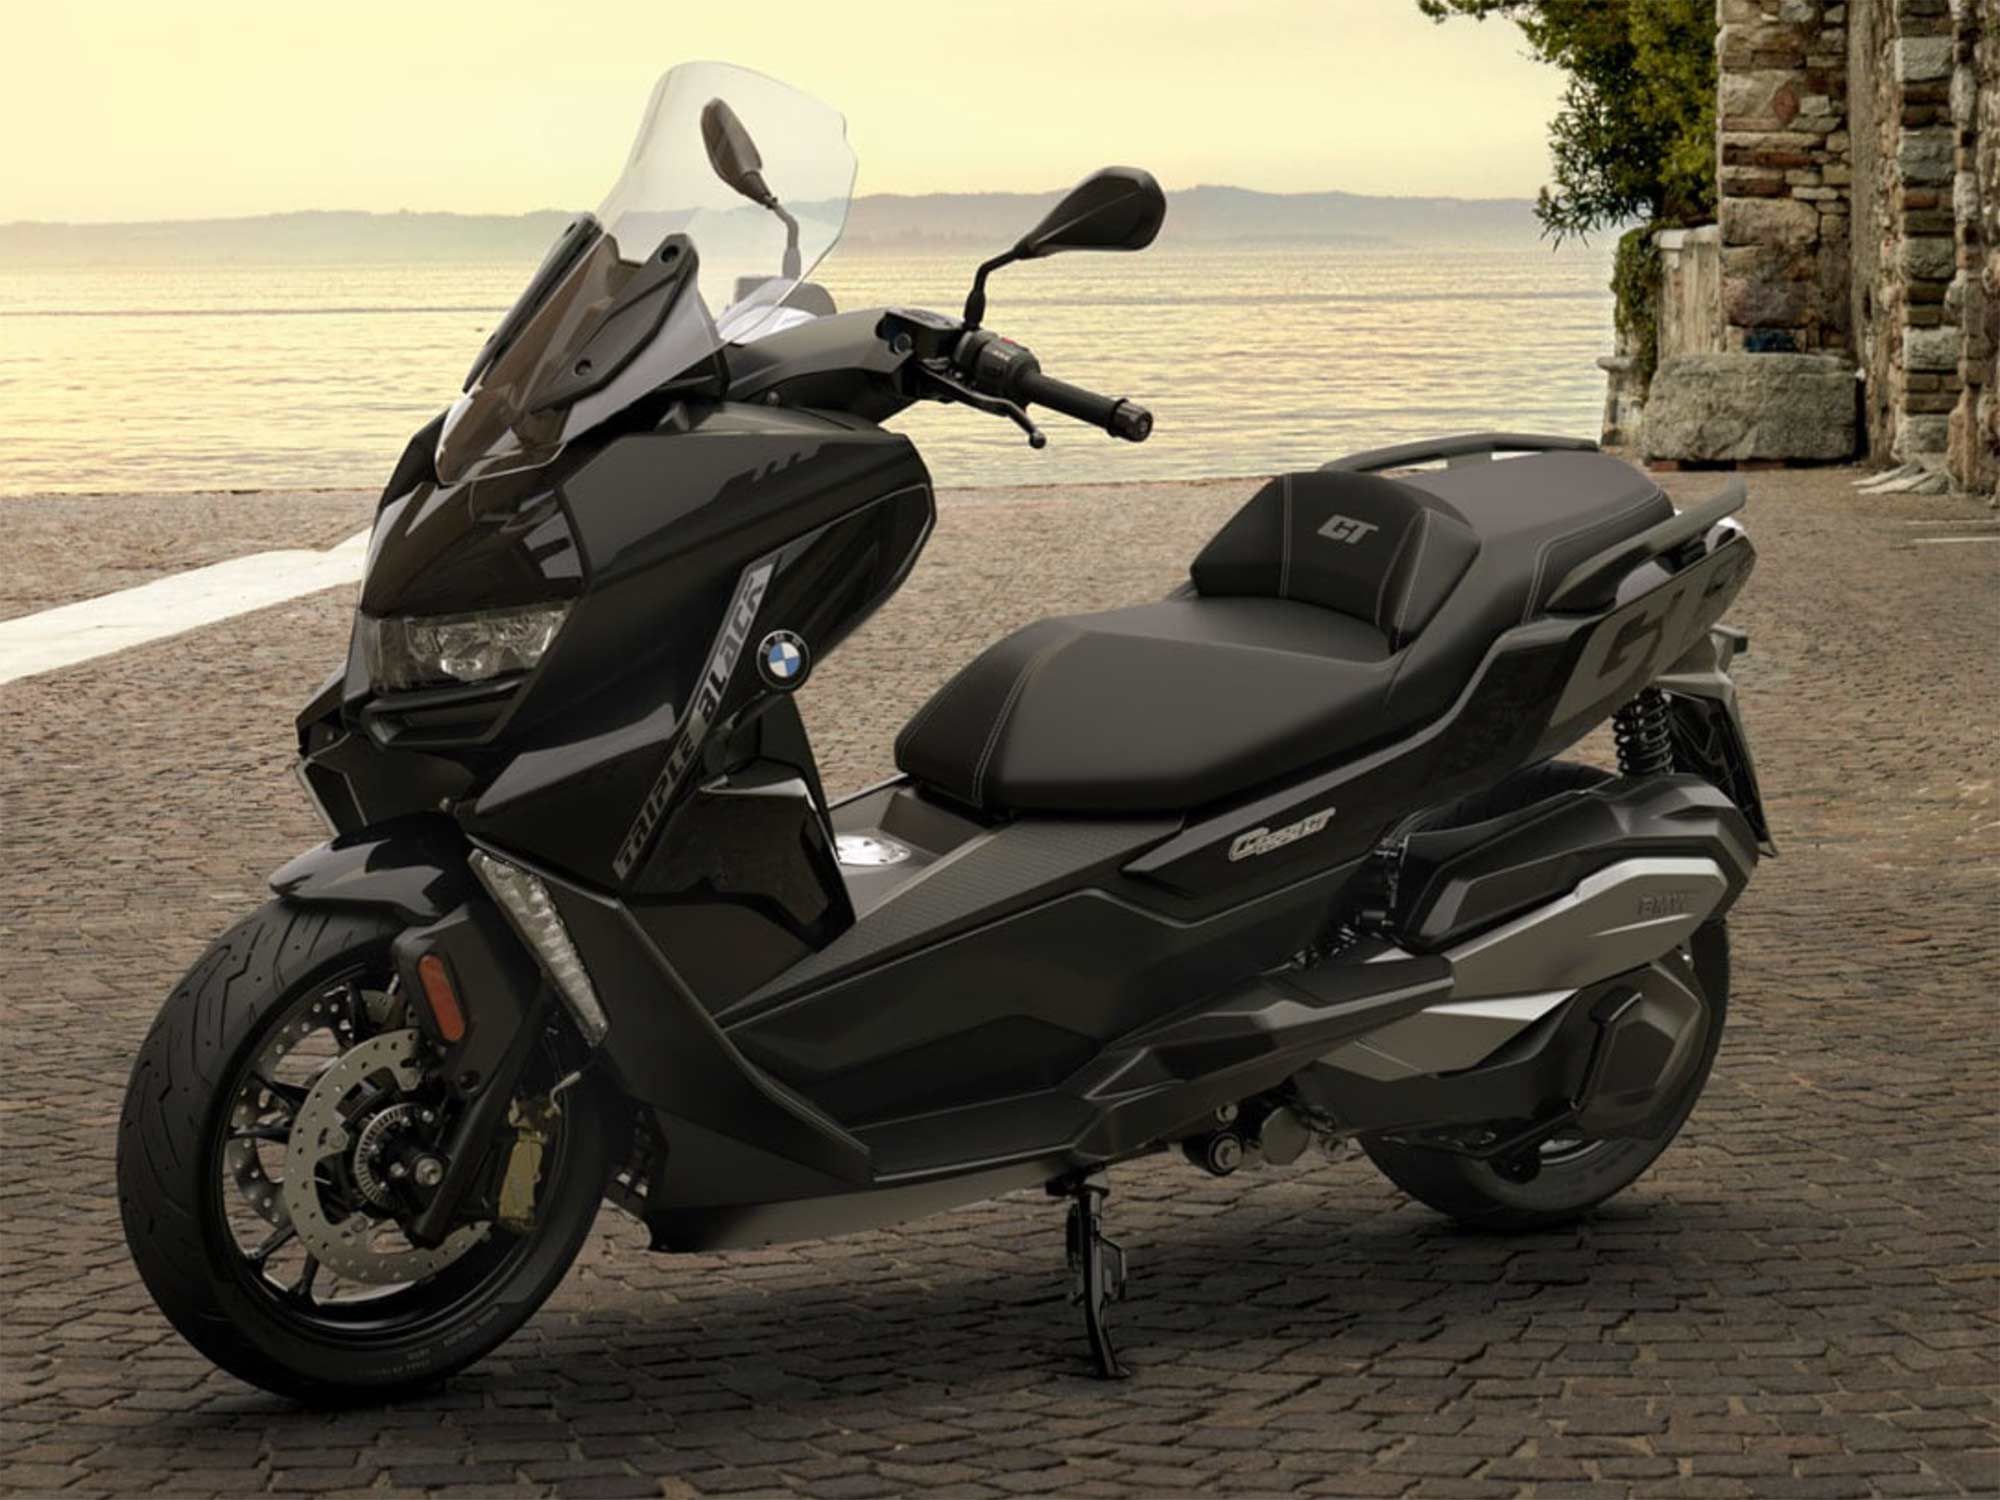 Get lost: The BMW C 400 GT’s generous 6.5-inch TFT display makes getting found easy.